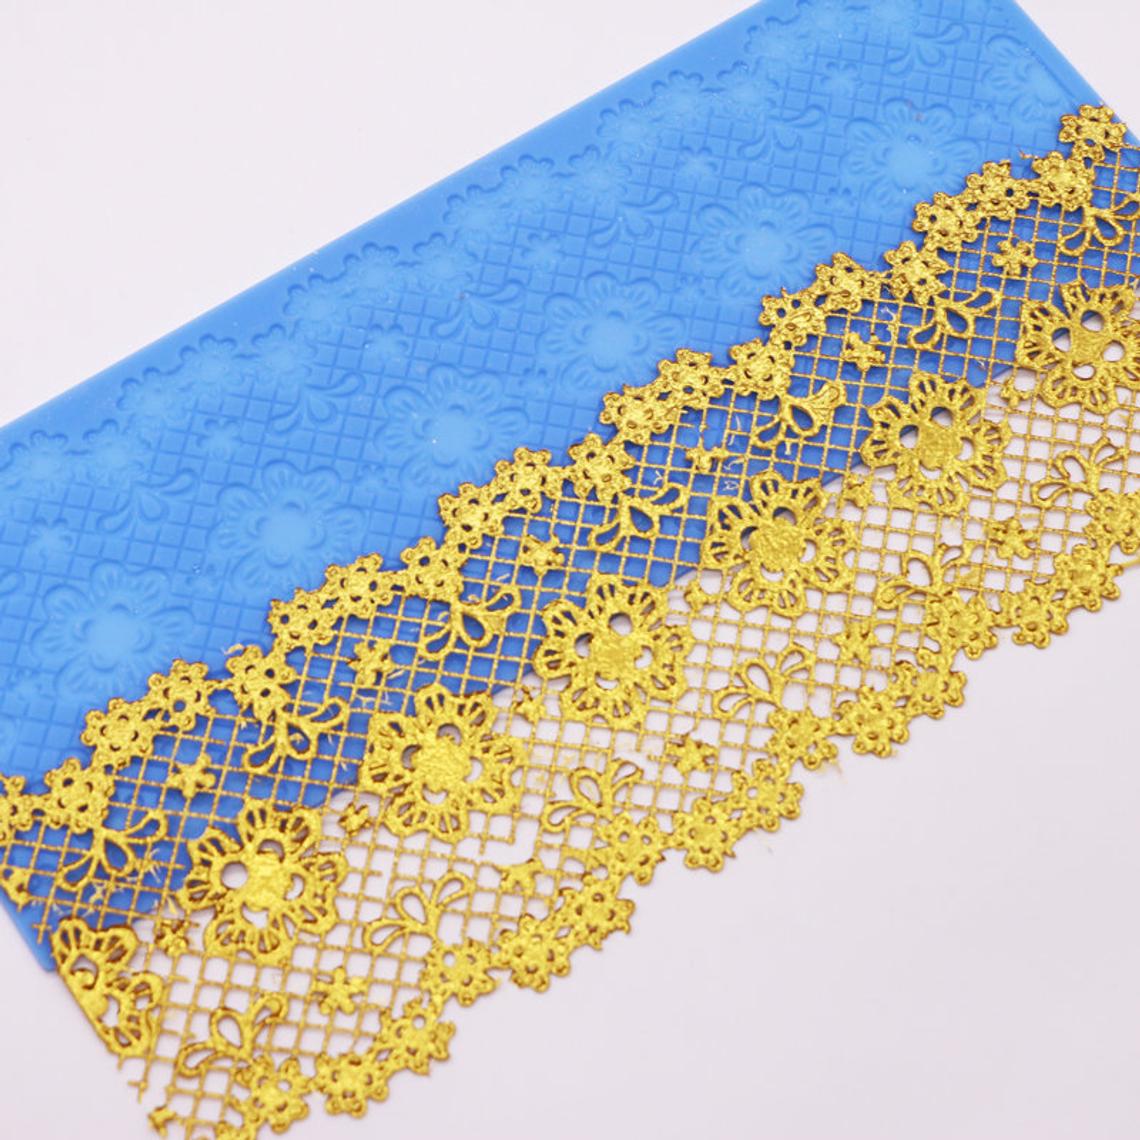 Silicon Lace Mat